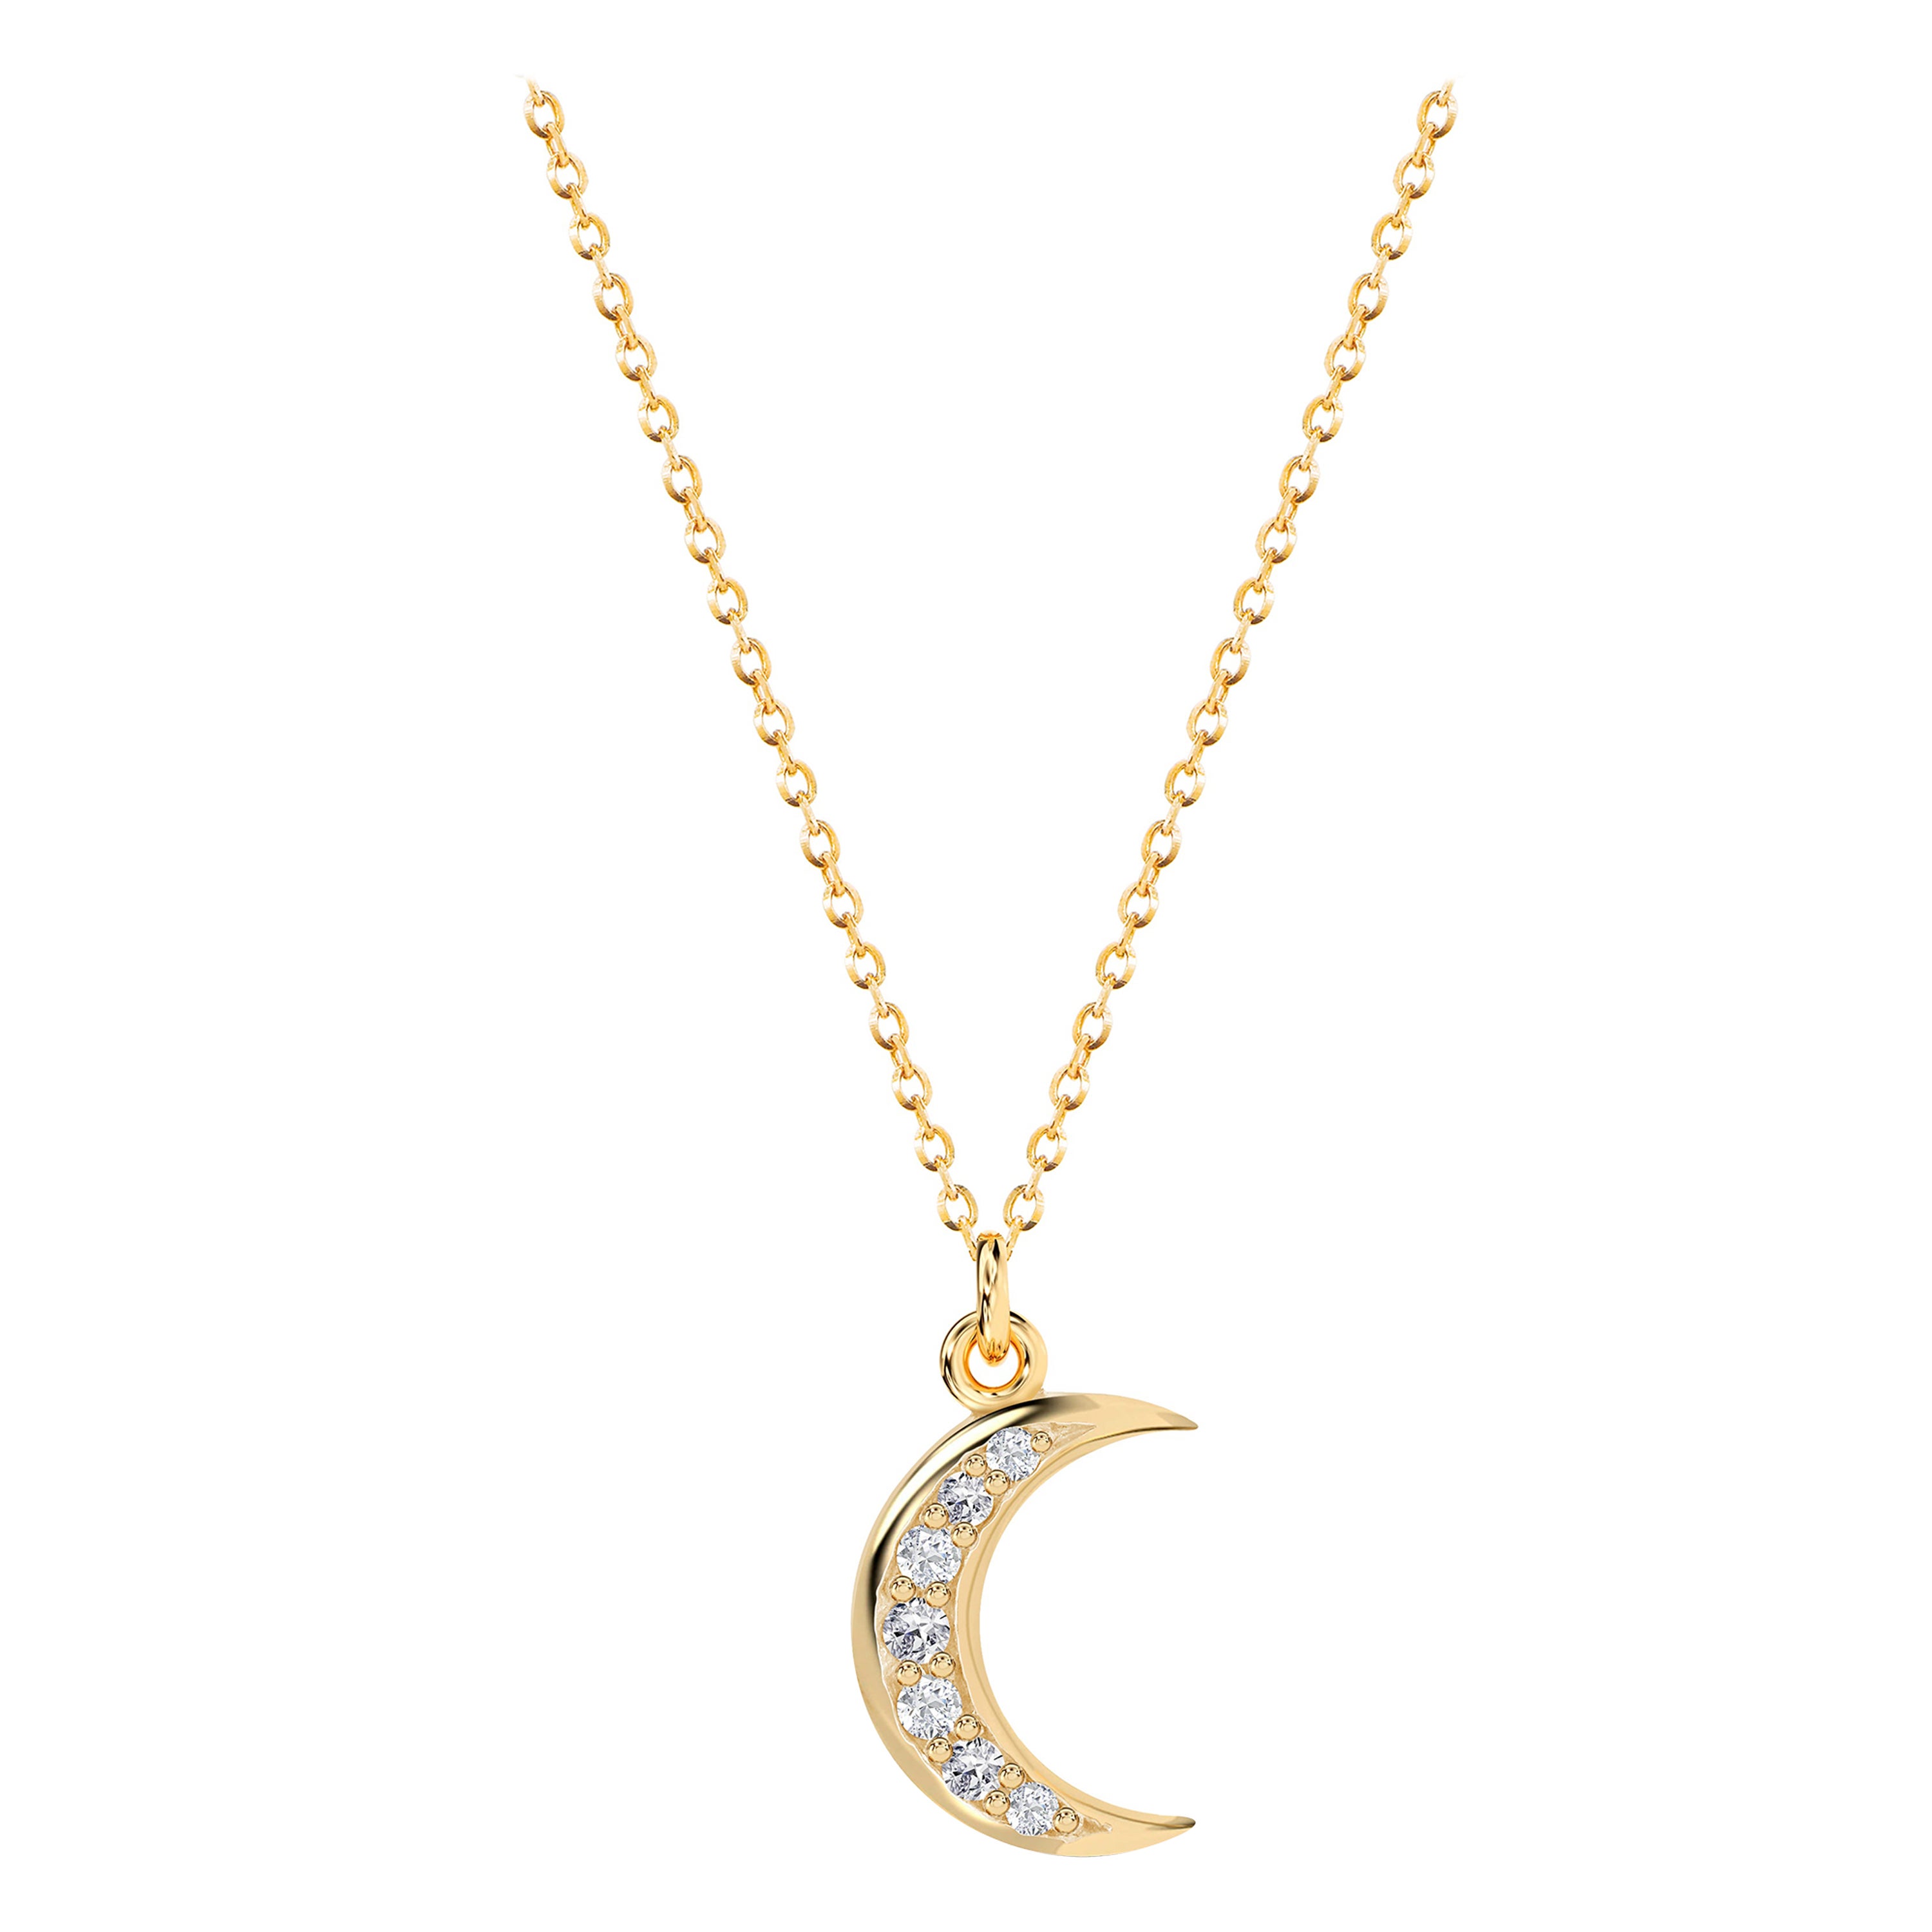 Crescent Moon Necklace 14K Yellow Gold 16-18